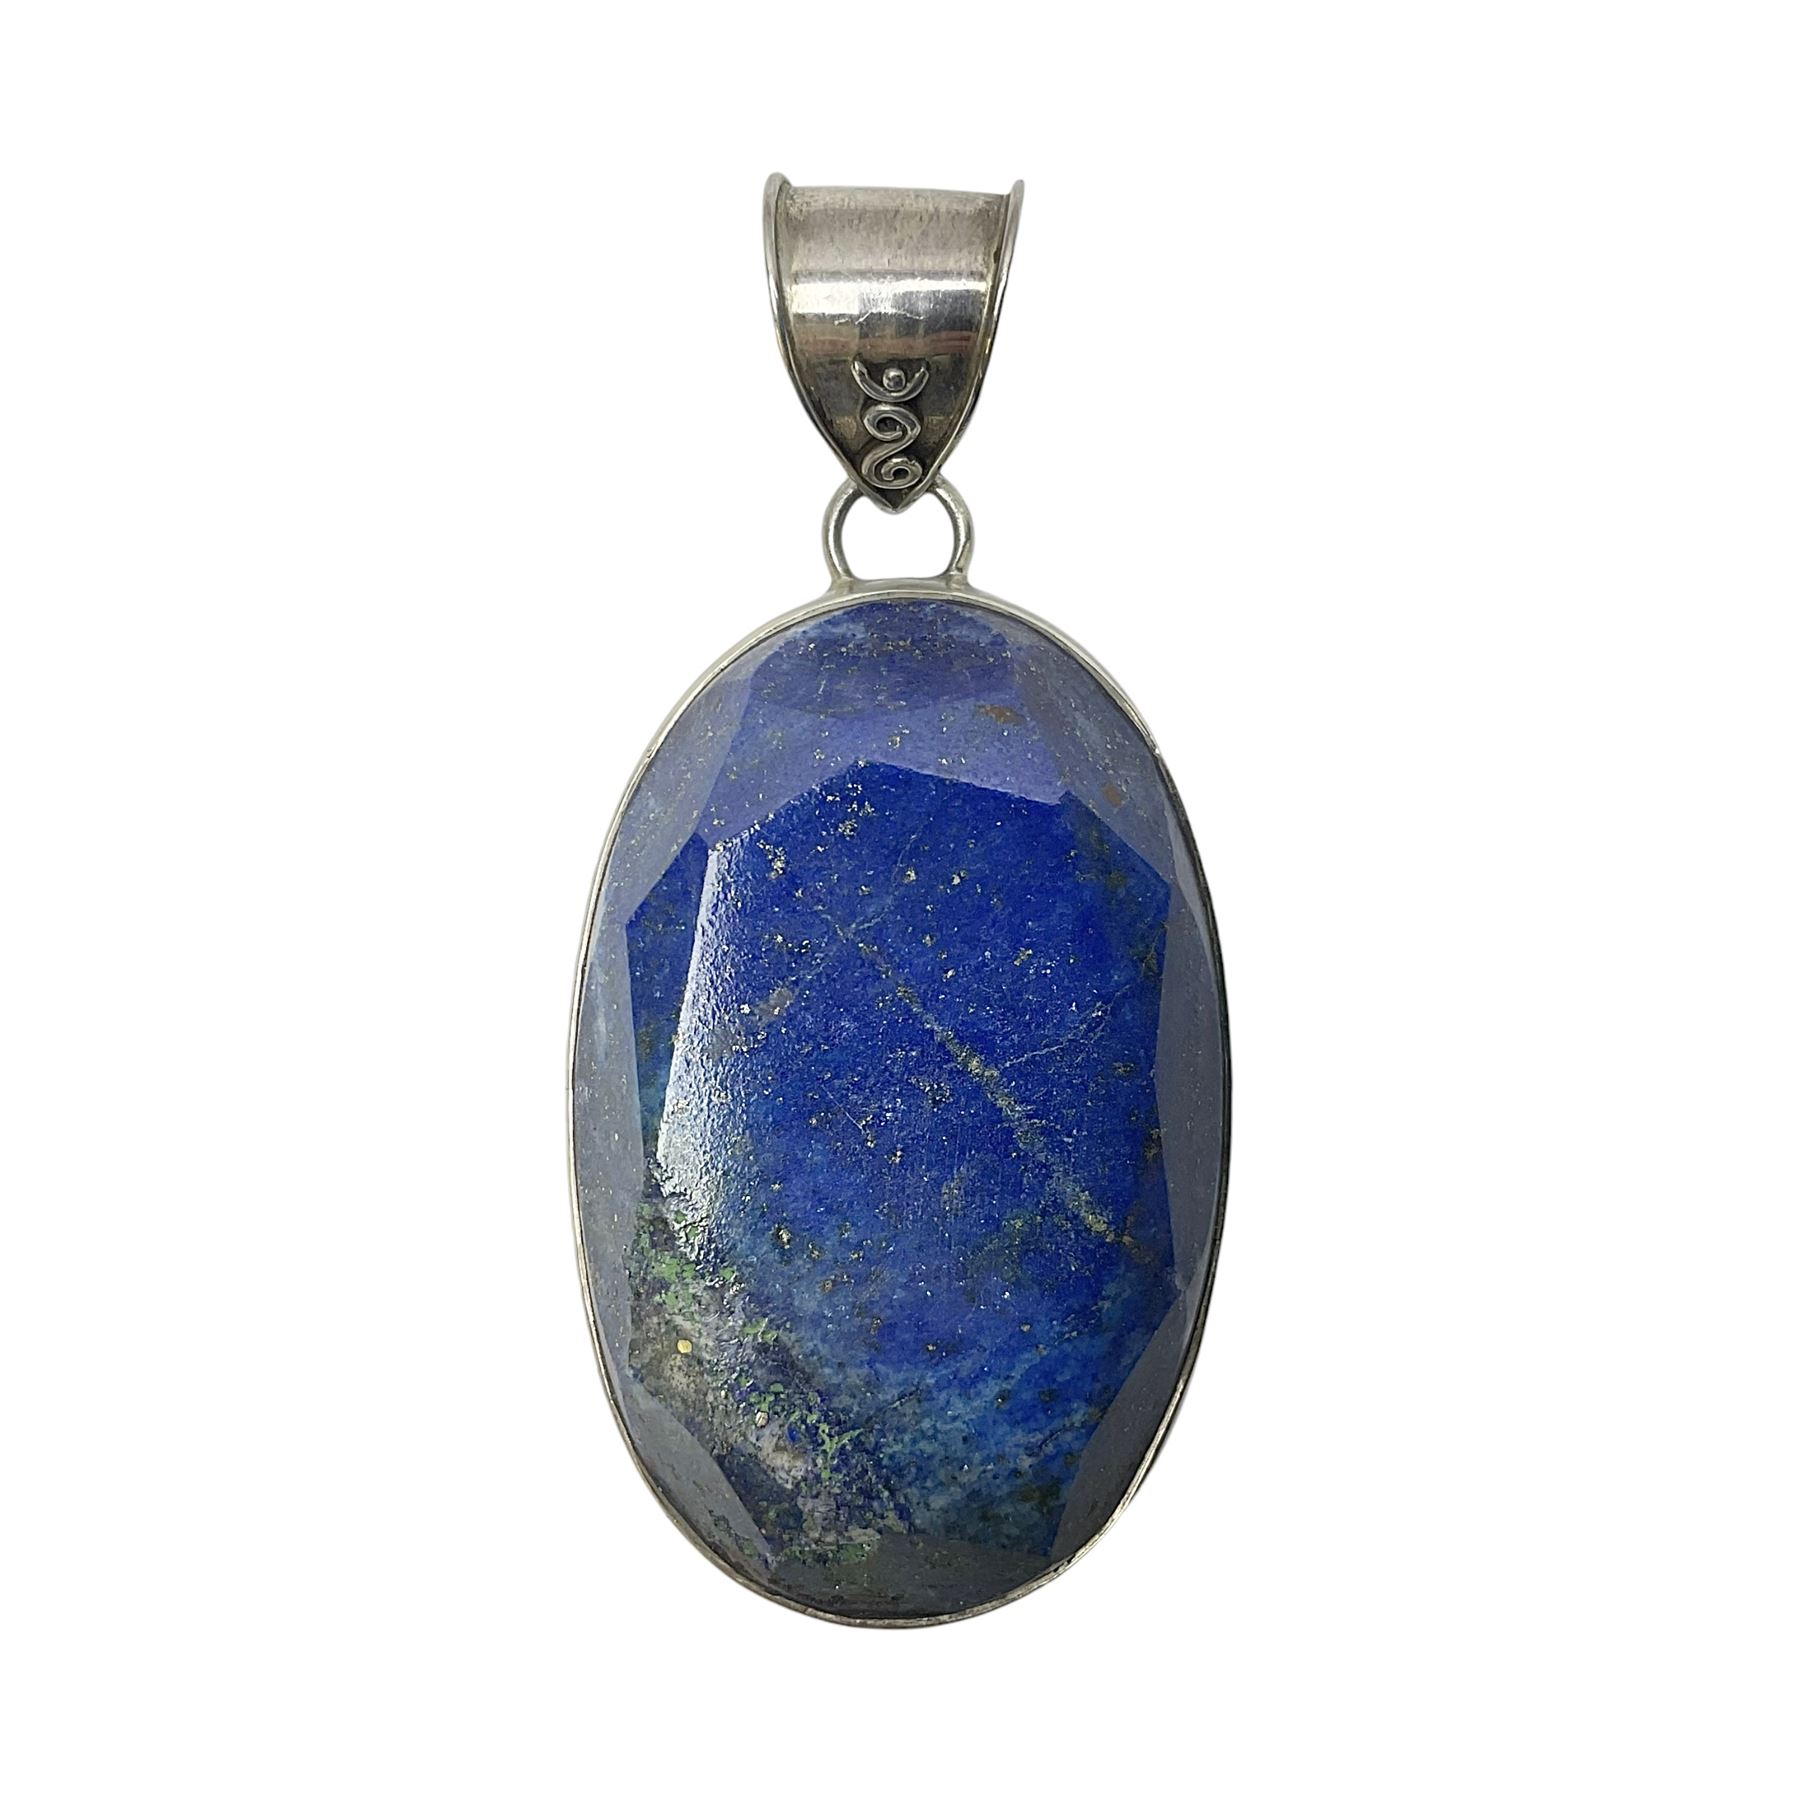 Large oval silver and lapis lazuli pendant